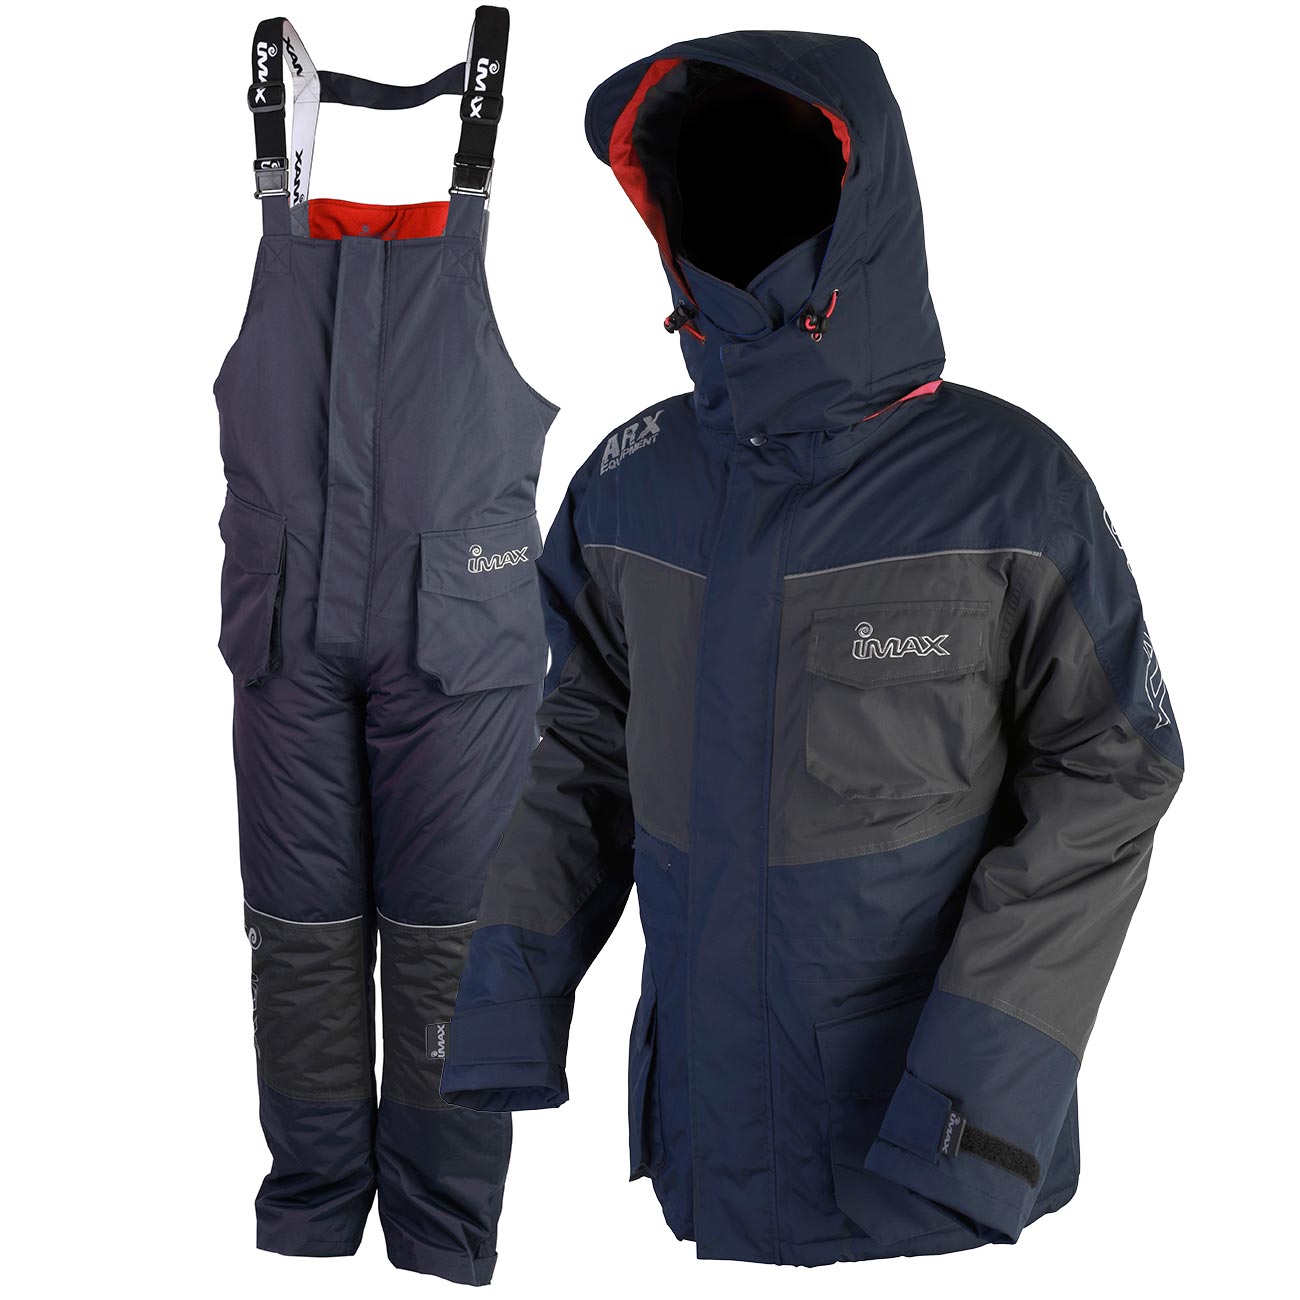 Prologic Thermo Waterproof Fishing Suit Includes Jacket and Bib and Brace 